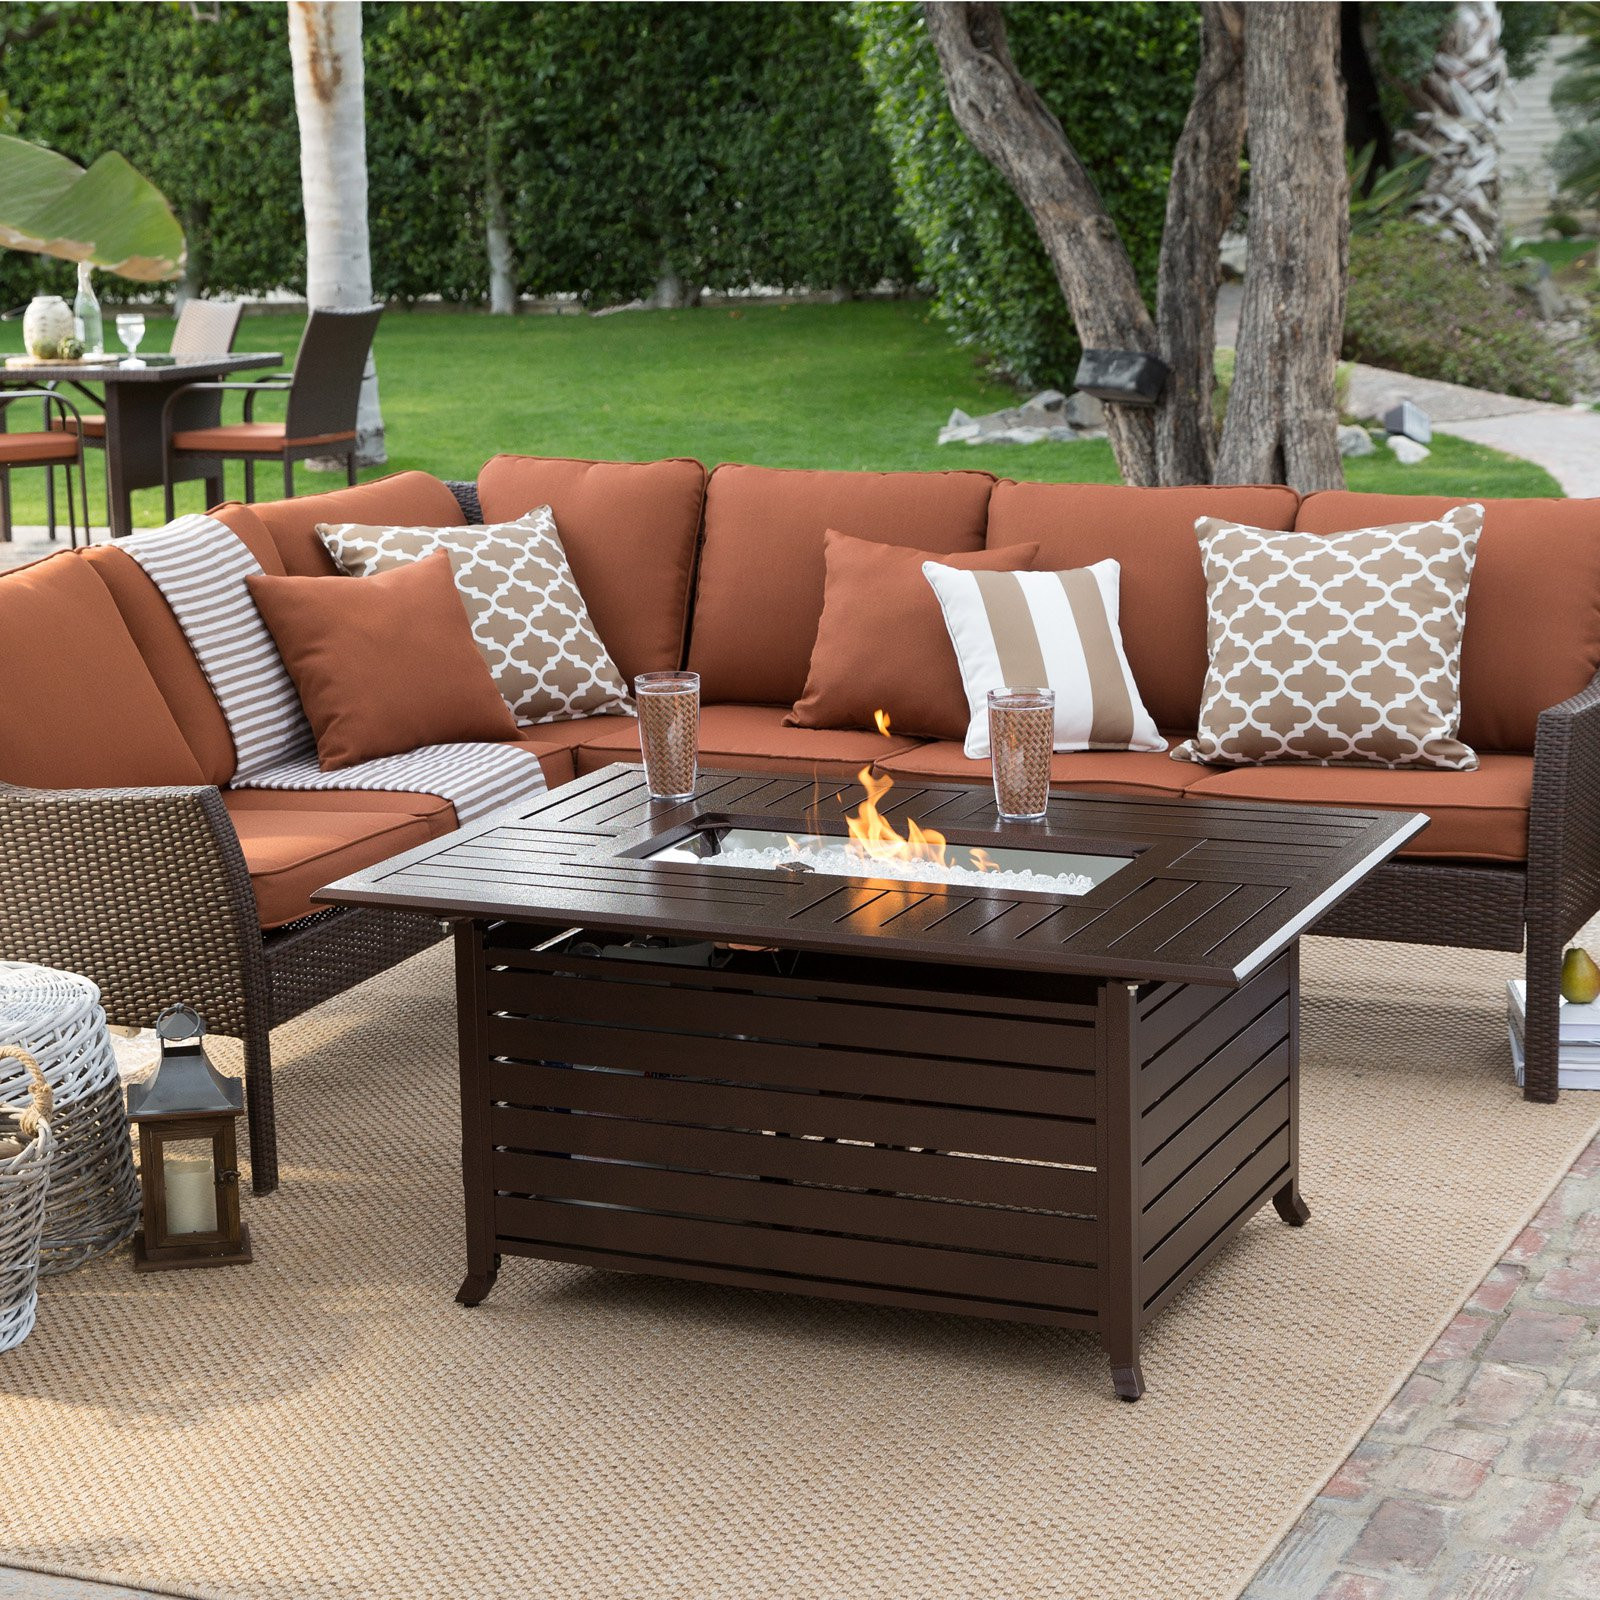 Patio Sets With Fire Pit
 Belham Living Devon All Weather Wicker Fire Pit